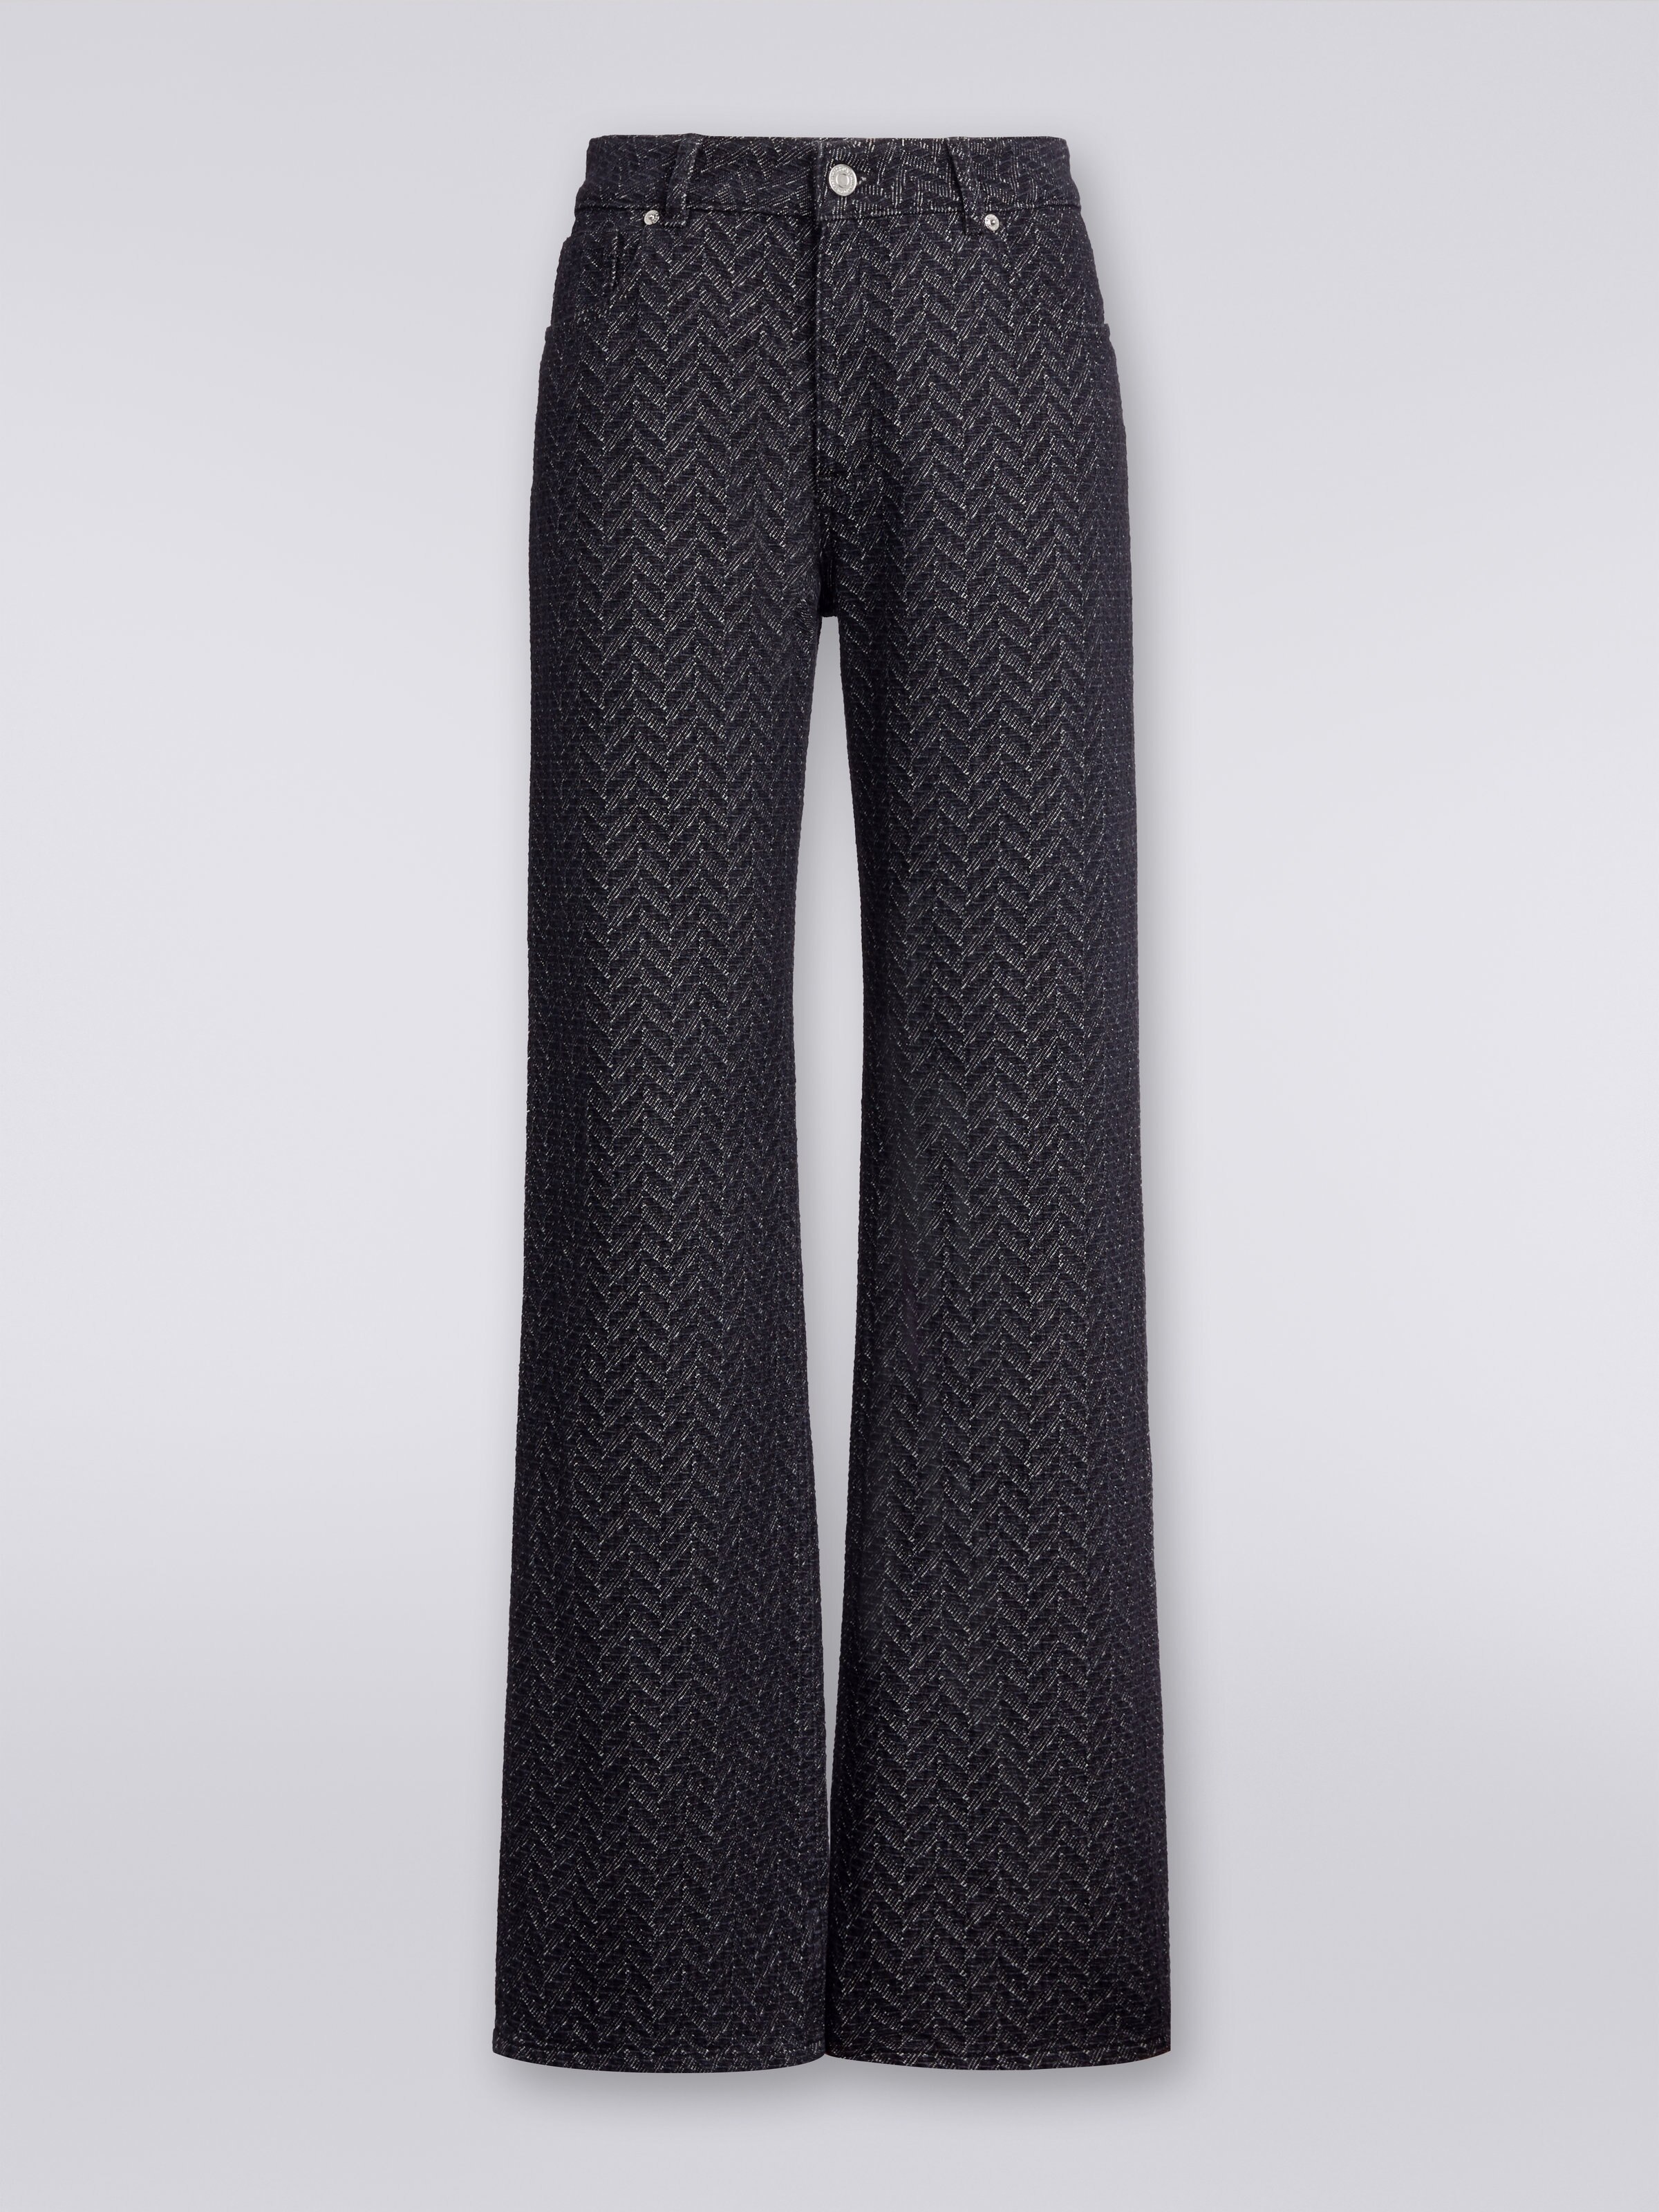 Five-pocket cotton trousers with zigzag pattern and embroidery on the back pocket  , Black    - 0